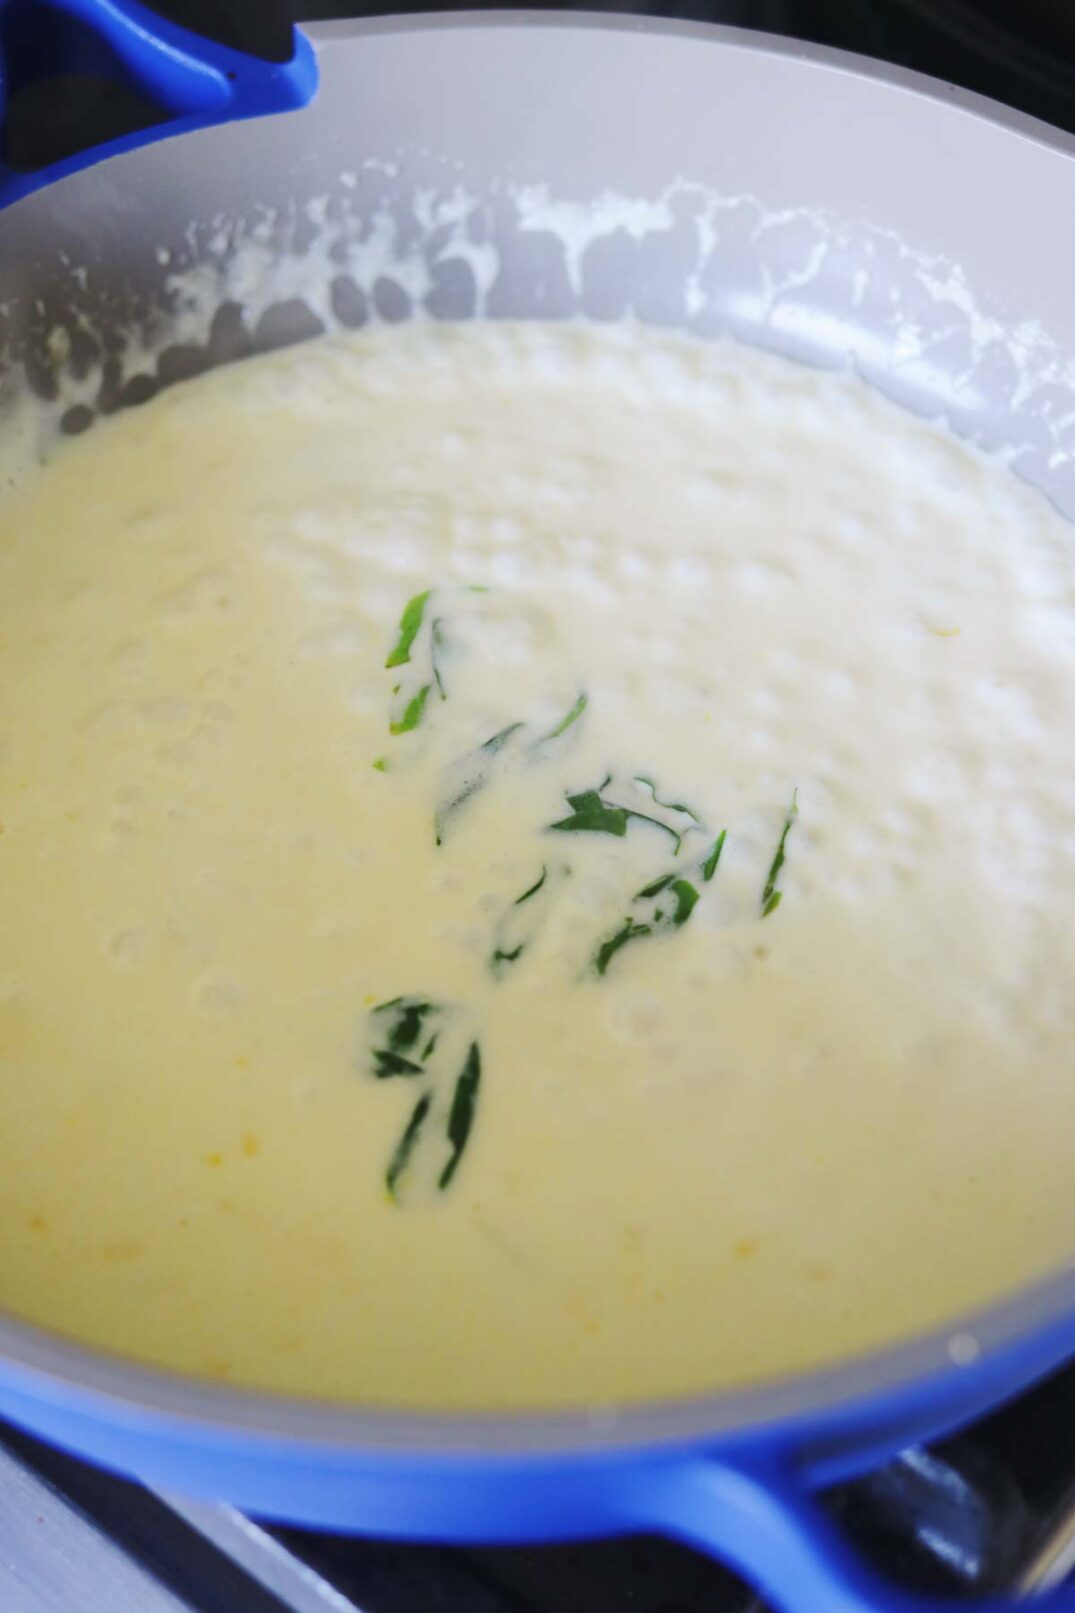 white sauce bubbling with basil in a blue pan.